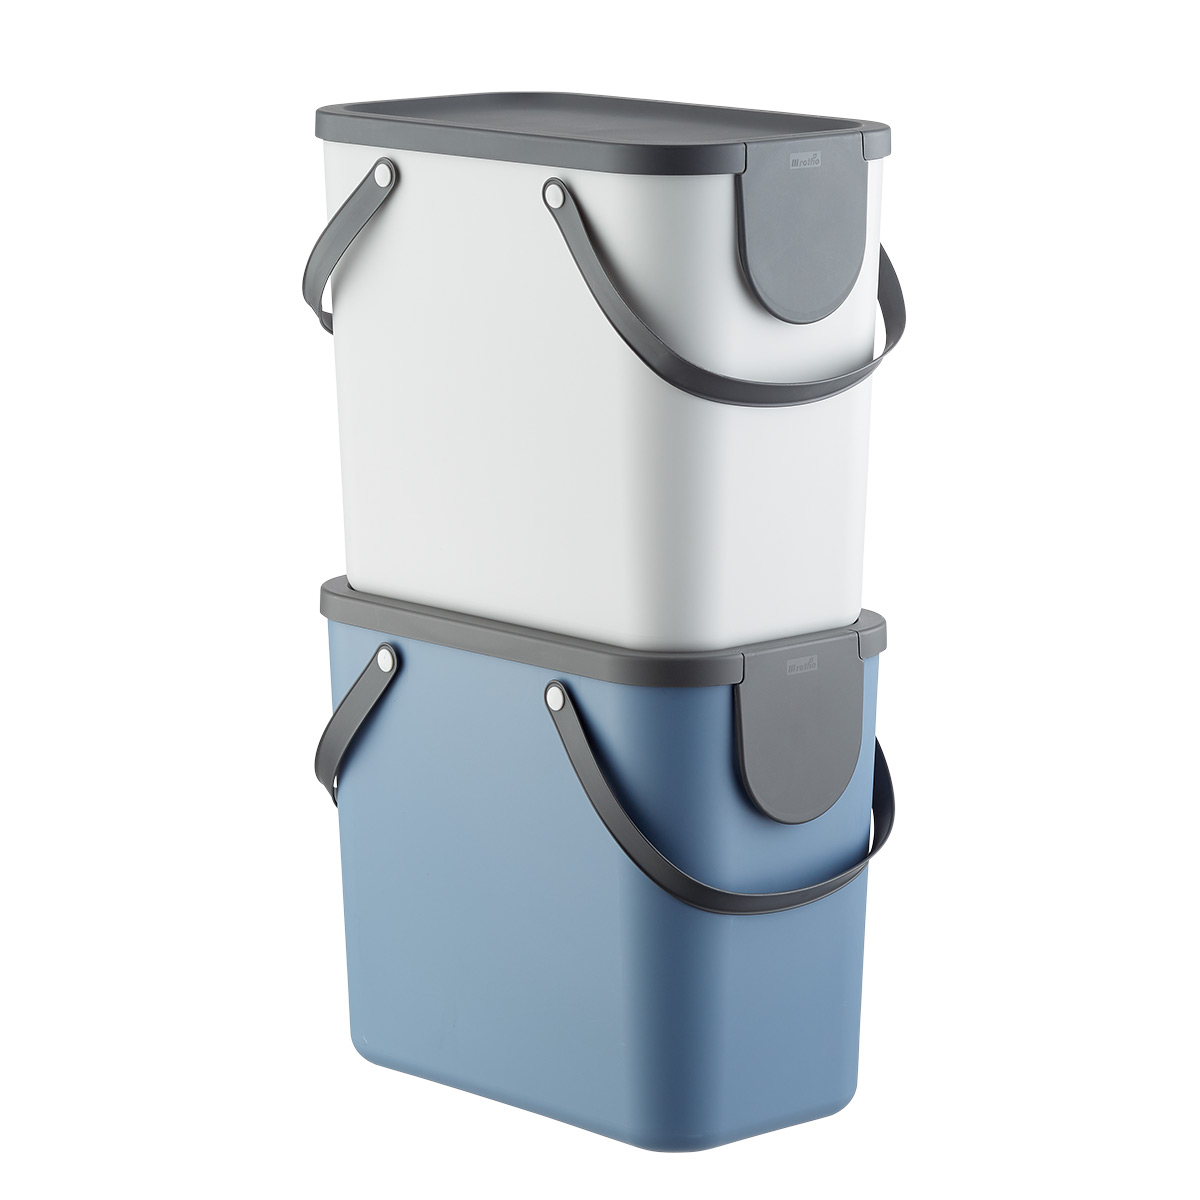 https://www.containerstore.com/catalogimages/386940/10079984g-stacking-recycle-bin.jpg